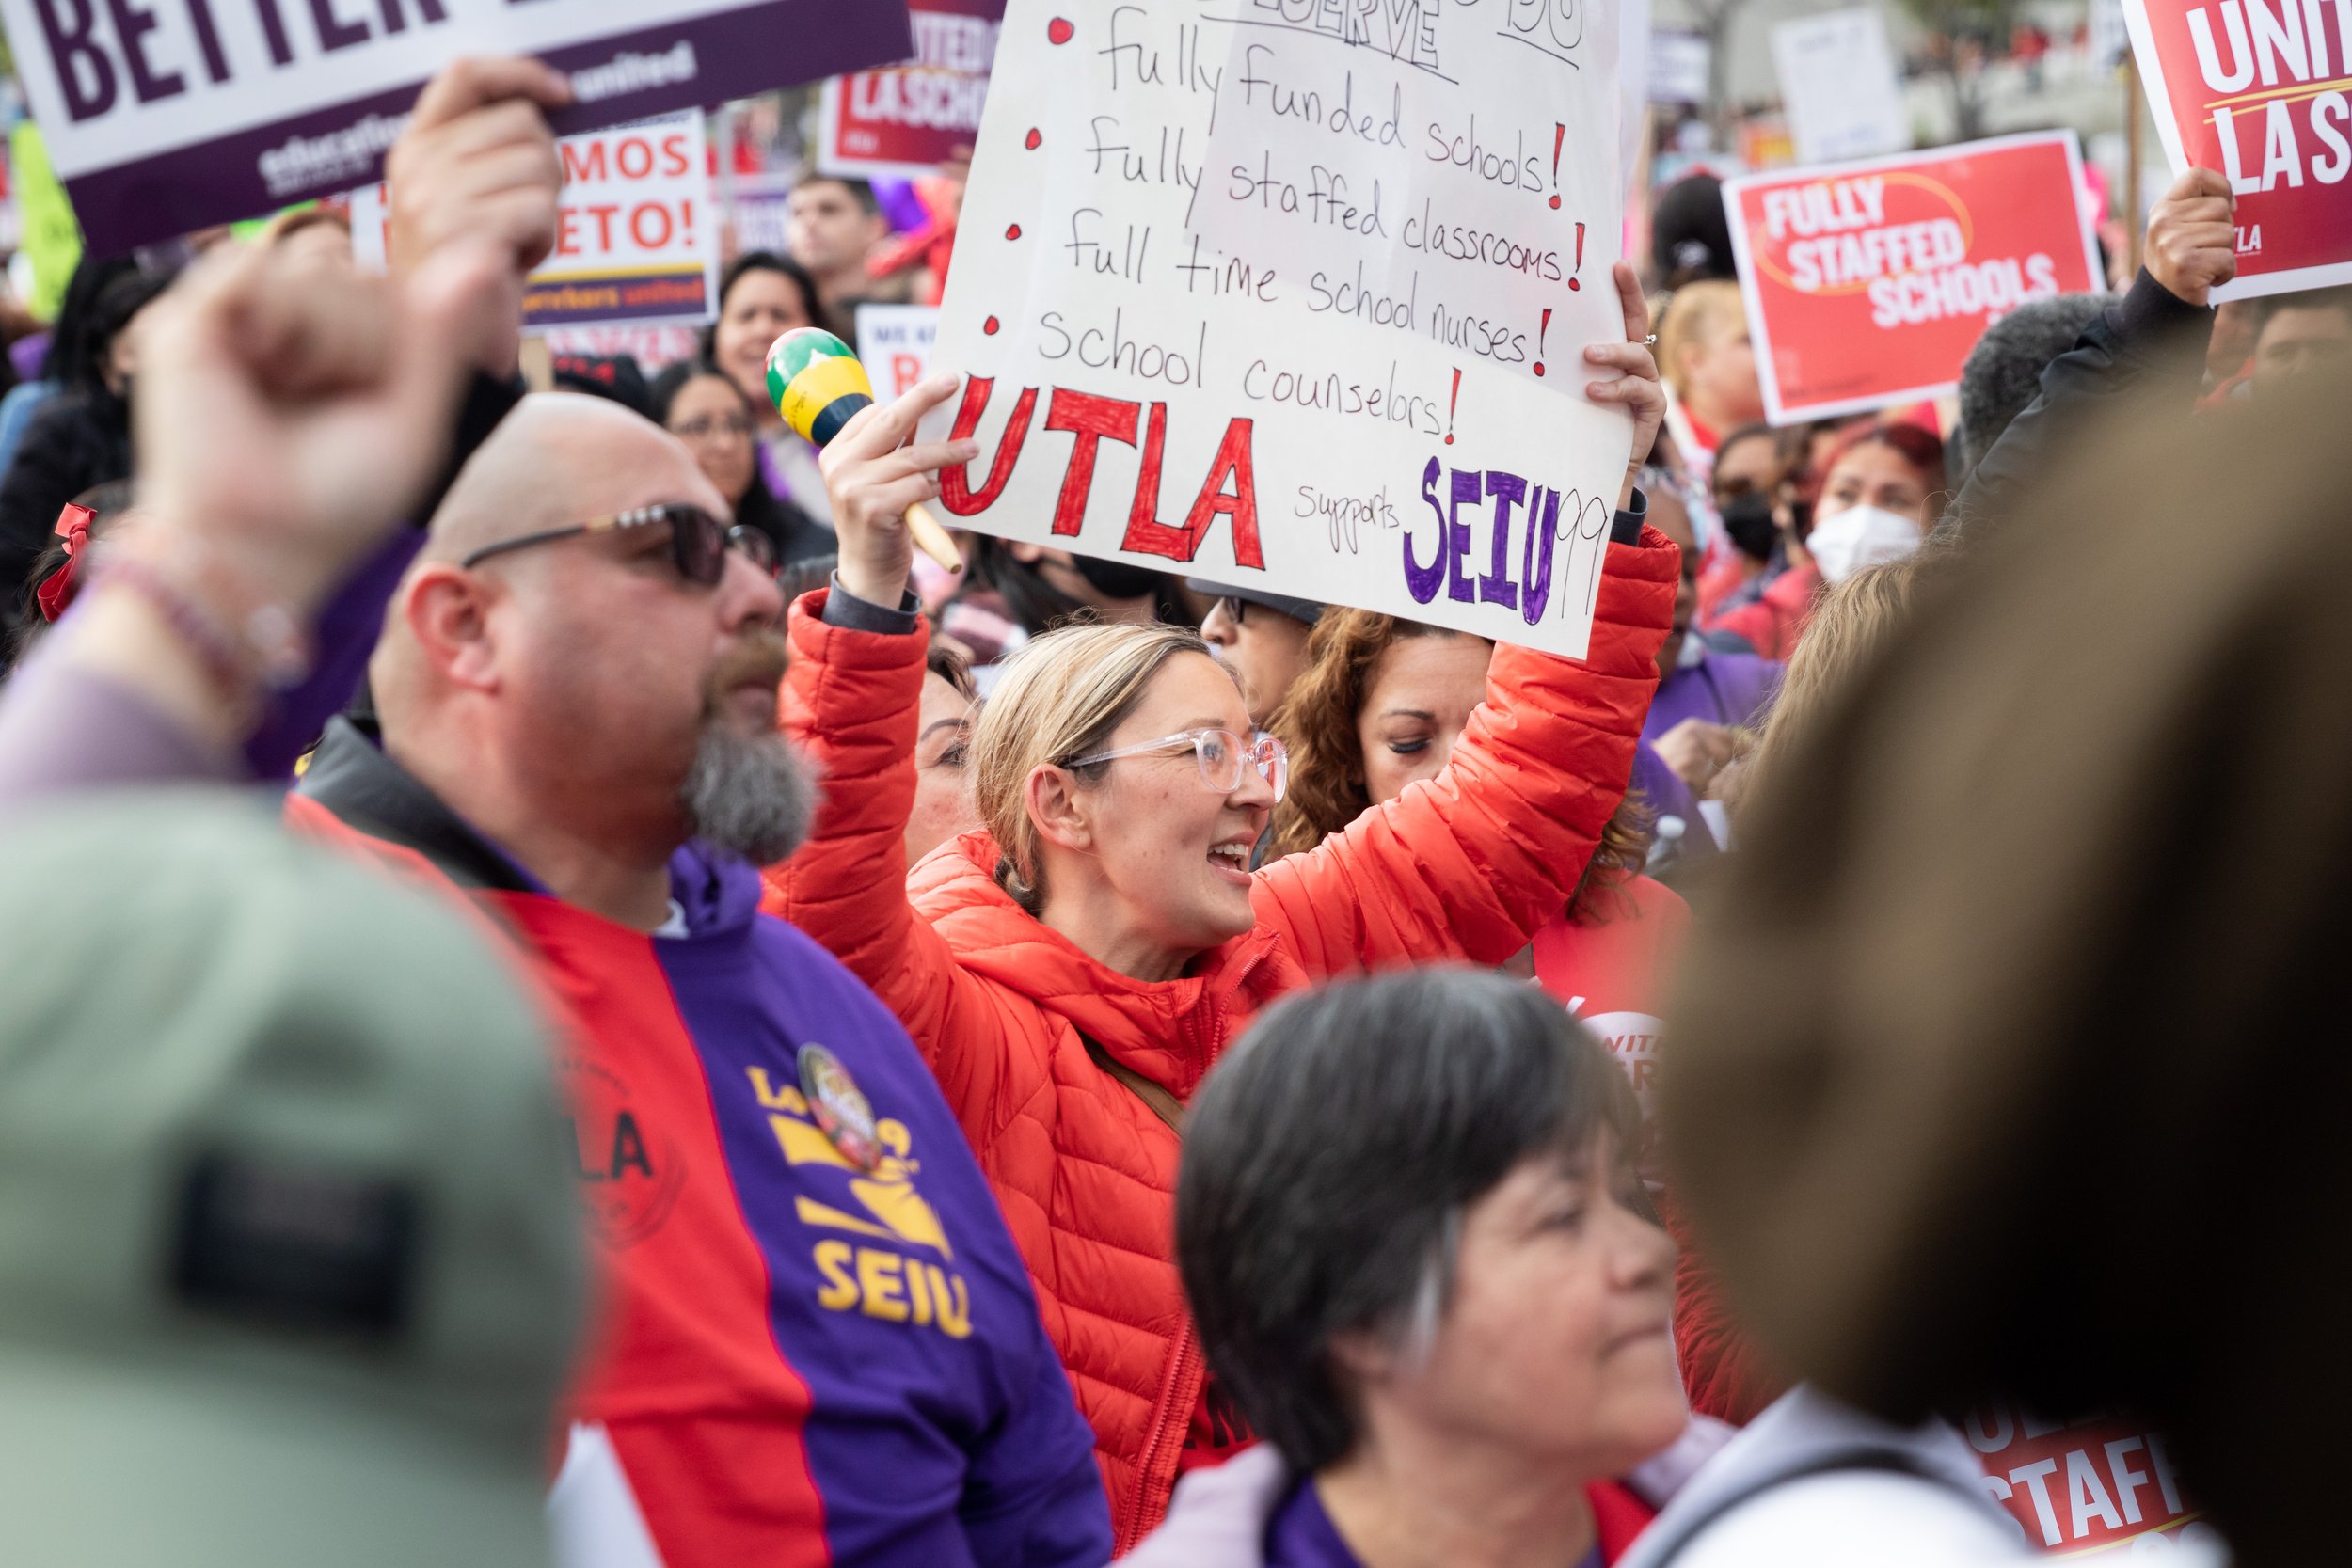  A protester holding a sign that has a list of demands at a joint rally held by United Teachers Los Angeles (UTLA) and Service Workers International Union (SEIU) Local 99 outside Los Angeles City Hall, Los Angeles, Calif., on Wednesday, March 15, 202